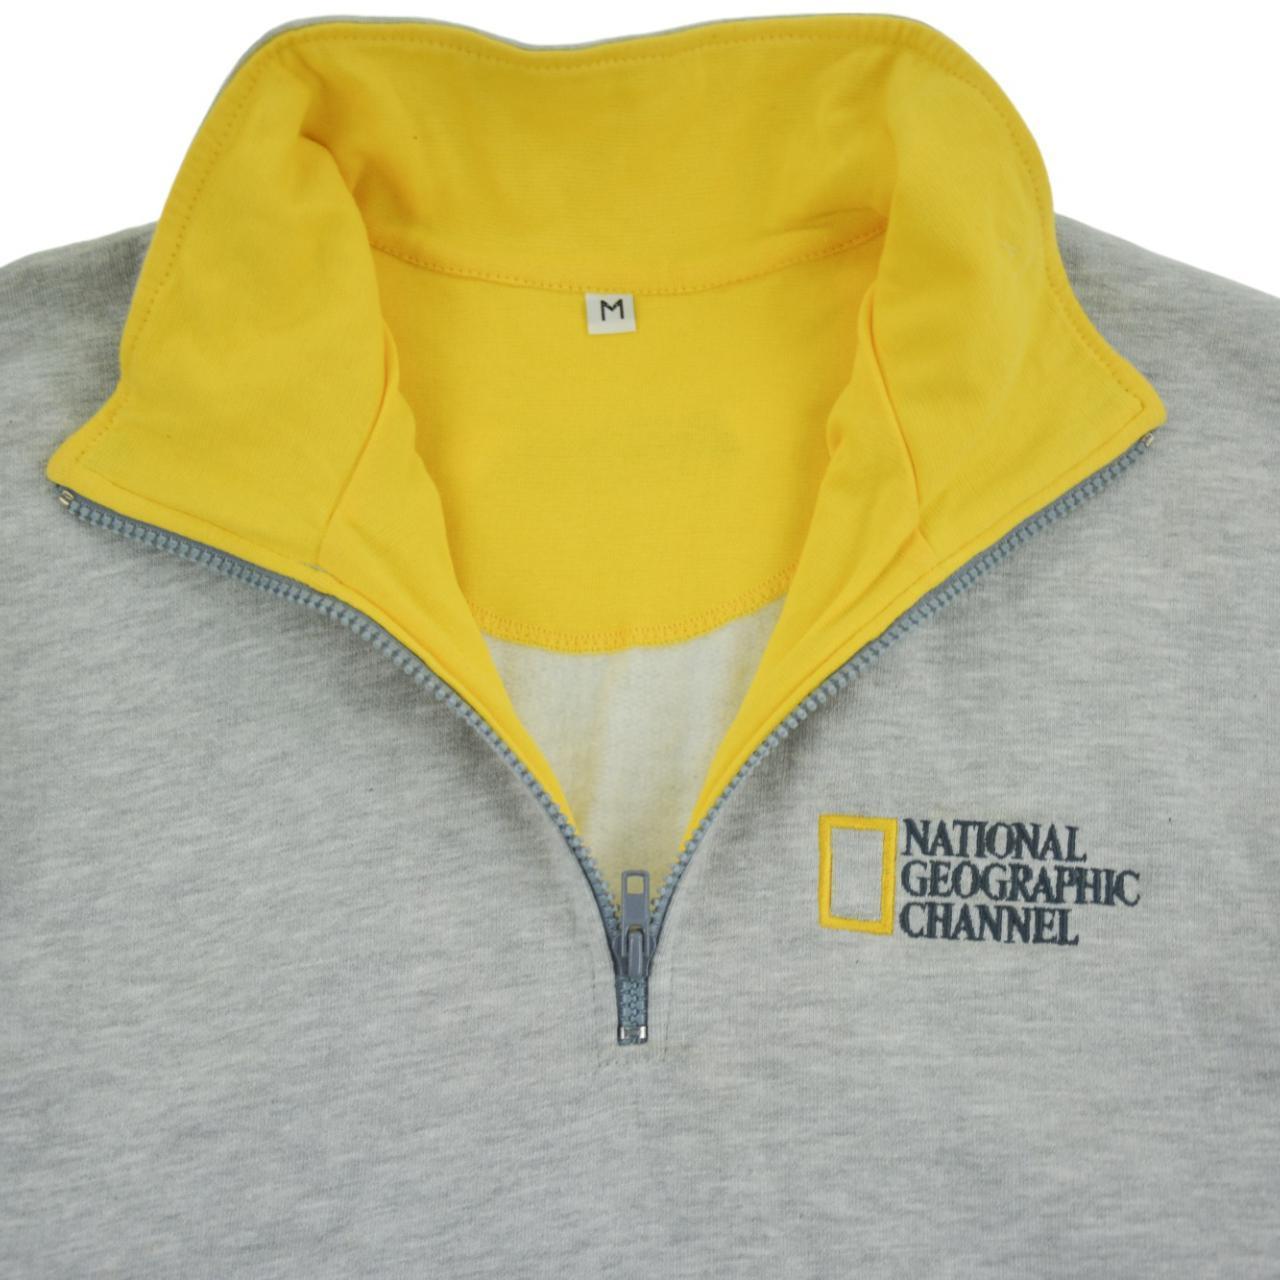 Vintage National Geographical Channel Q Zip Jumper Size S - Known Source